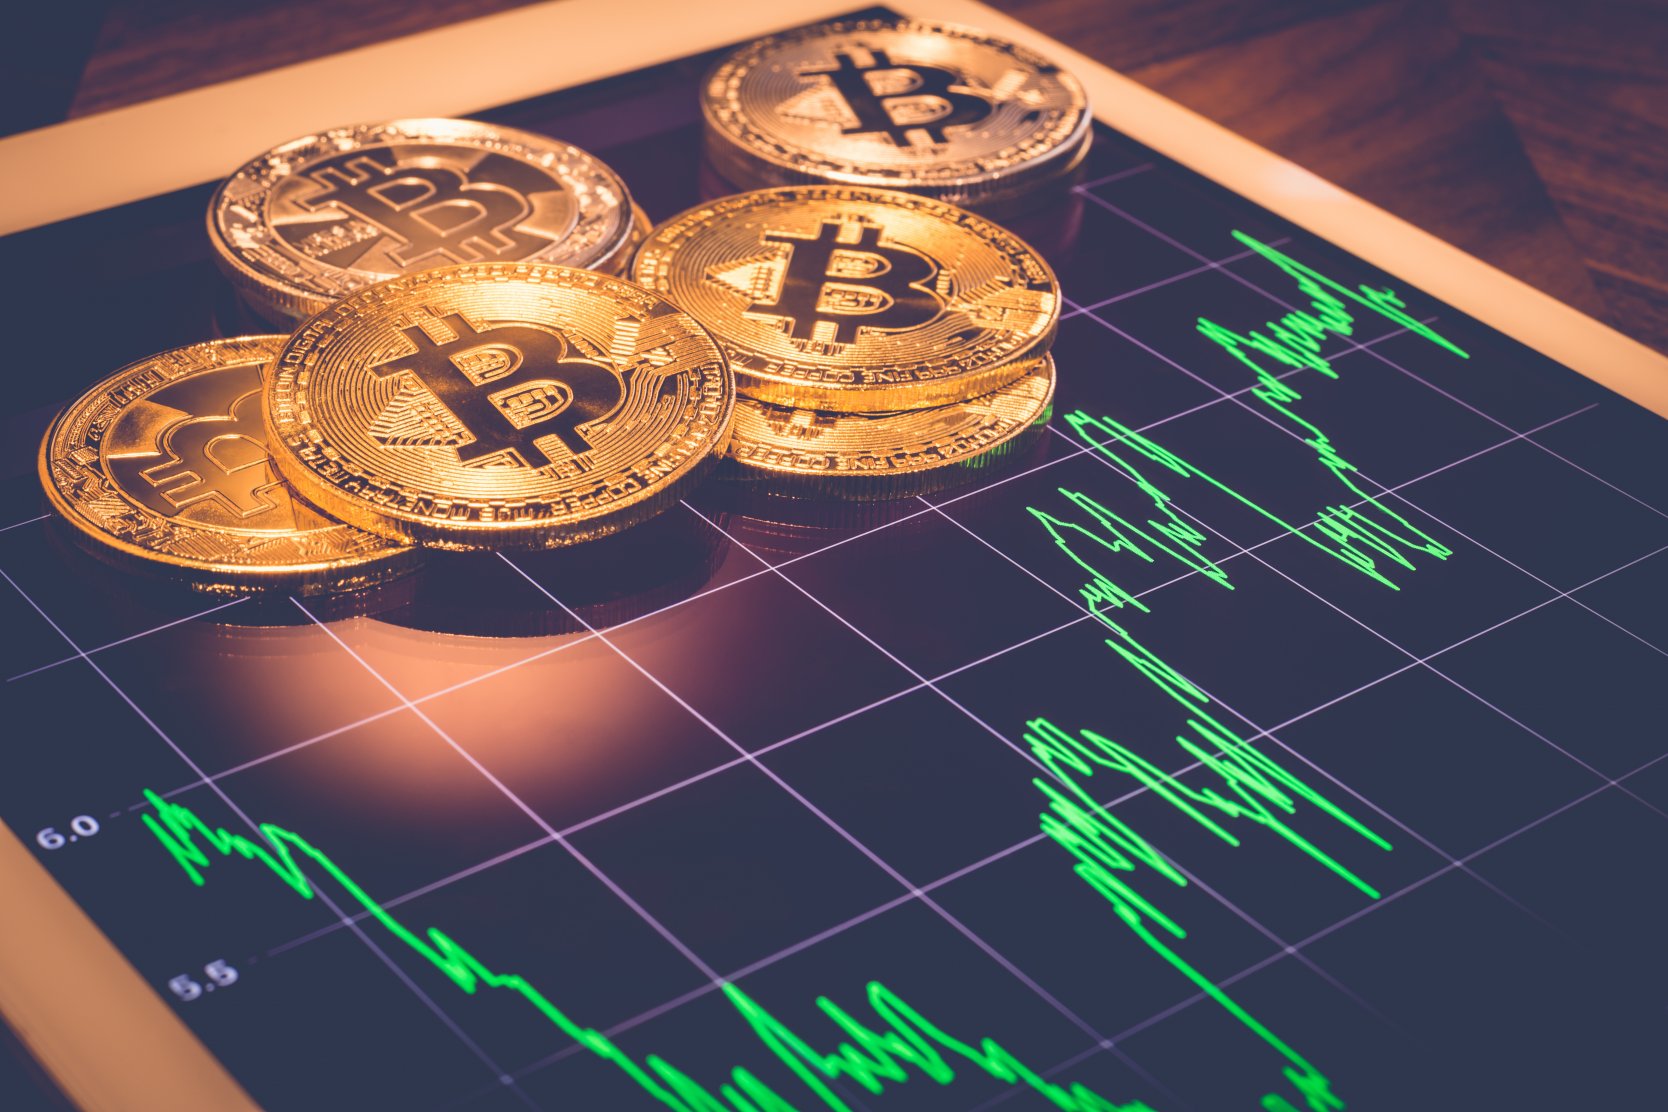 Bitcoin price analysis for November 30-December 6: the coin could